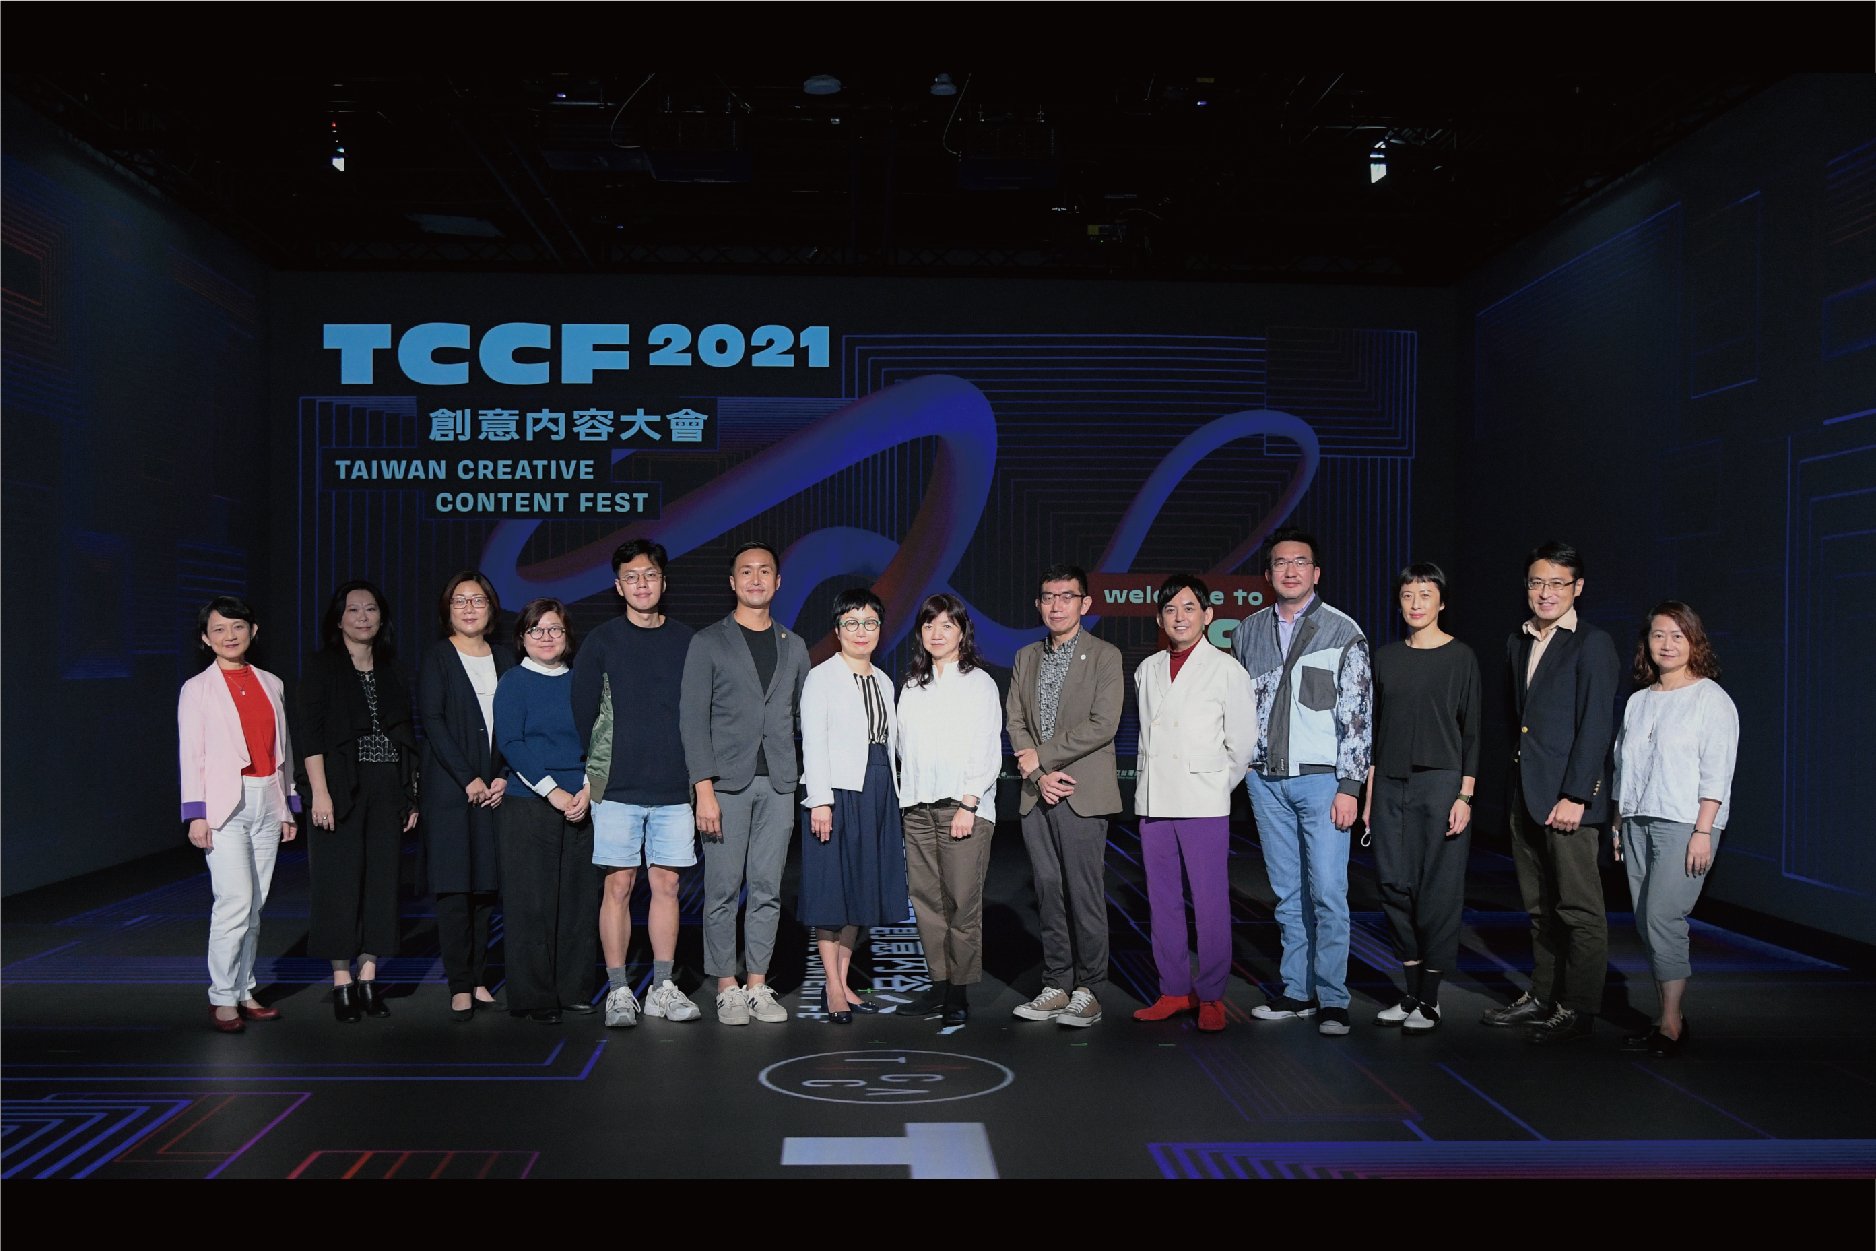 TAICCA Announced the 2021 Taiwan Creative Content Fest, Presenting Taiwan’s Content Industry to International Buyers